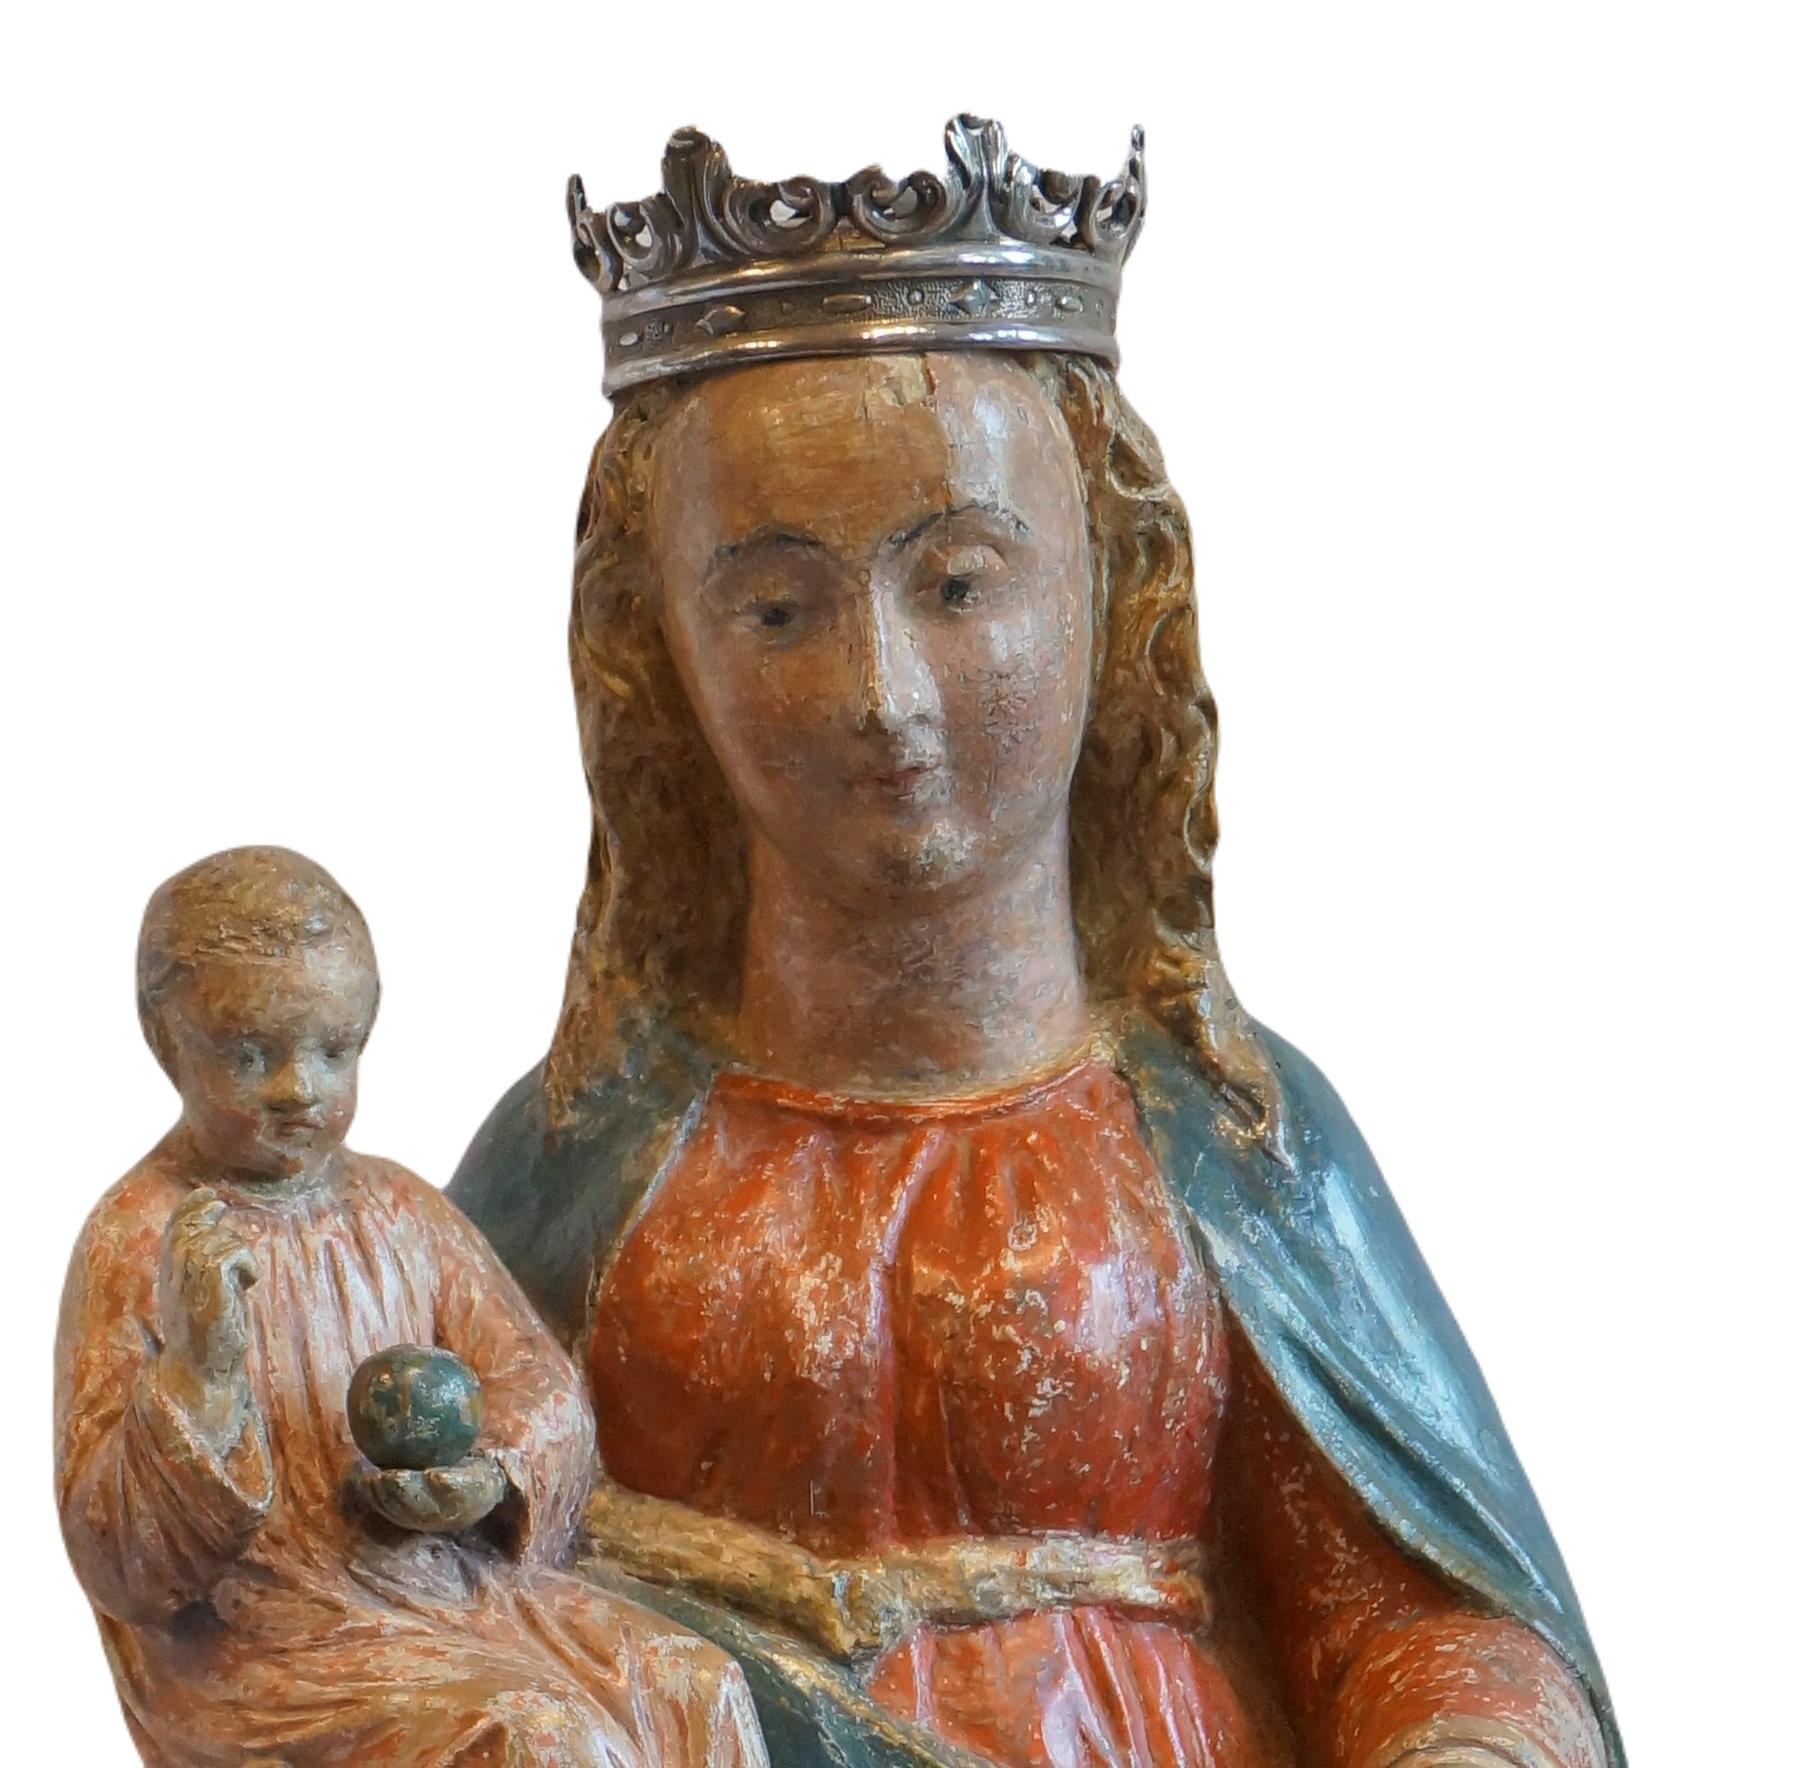 Sculpture of Mother Mary with the Child Jesus.
Mary has the child on her right hand. Jesus makes a blessing gesture and wears a small globe. ( a sign off His power over the world)
Mother Mary has a grape in her left hand.
The faces of both Mother